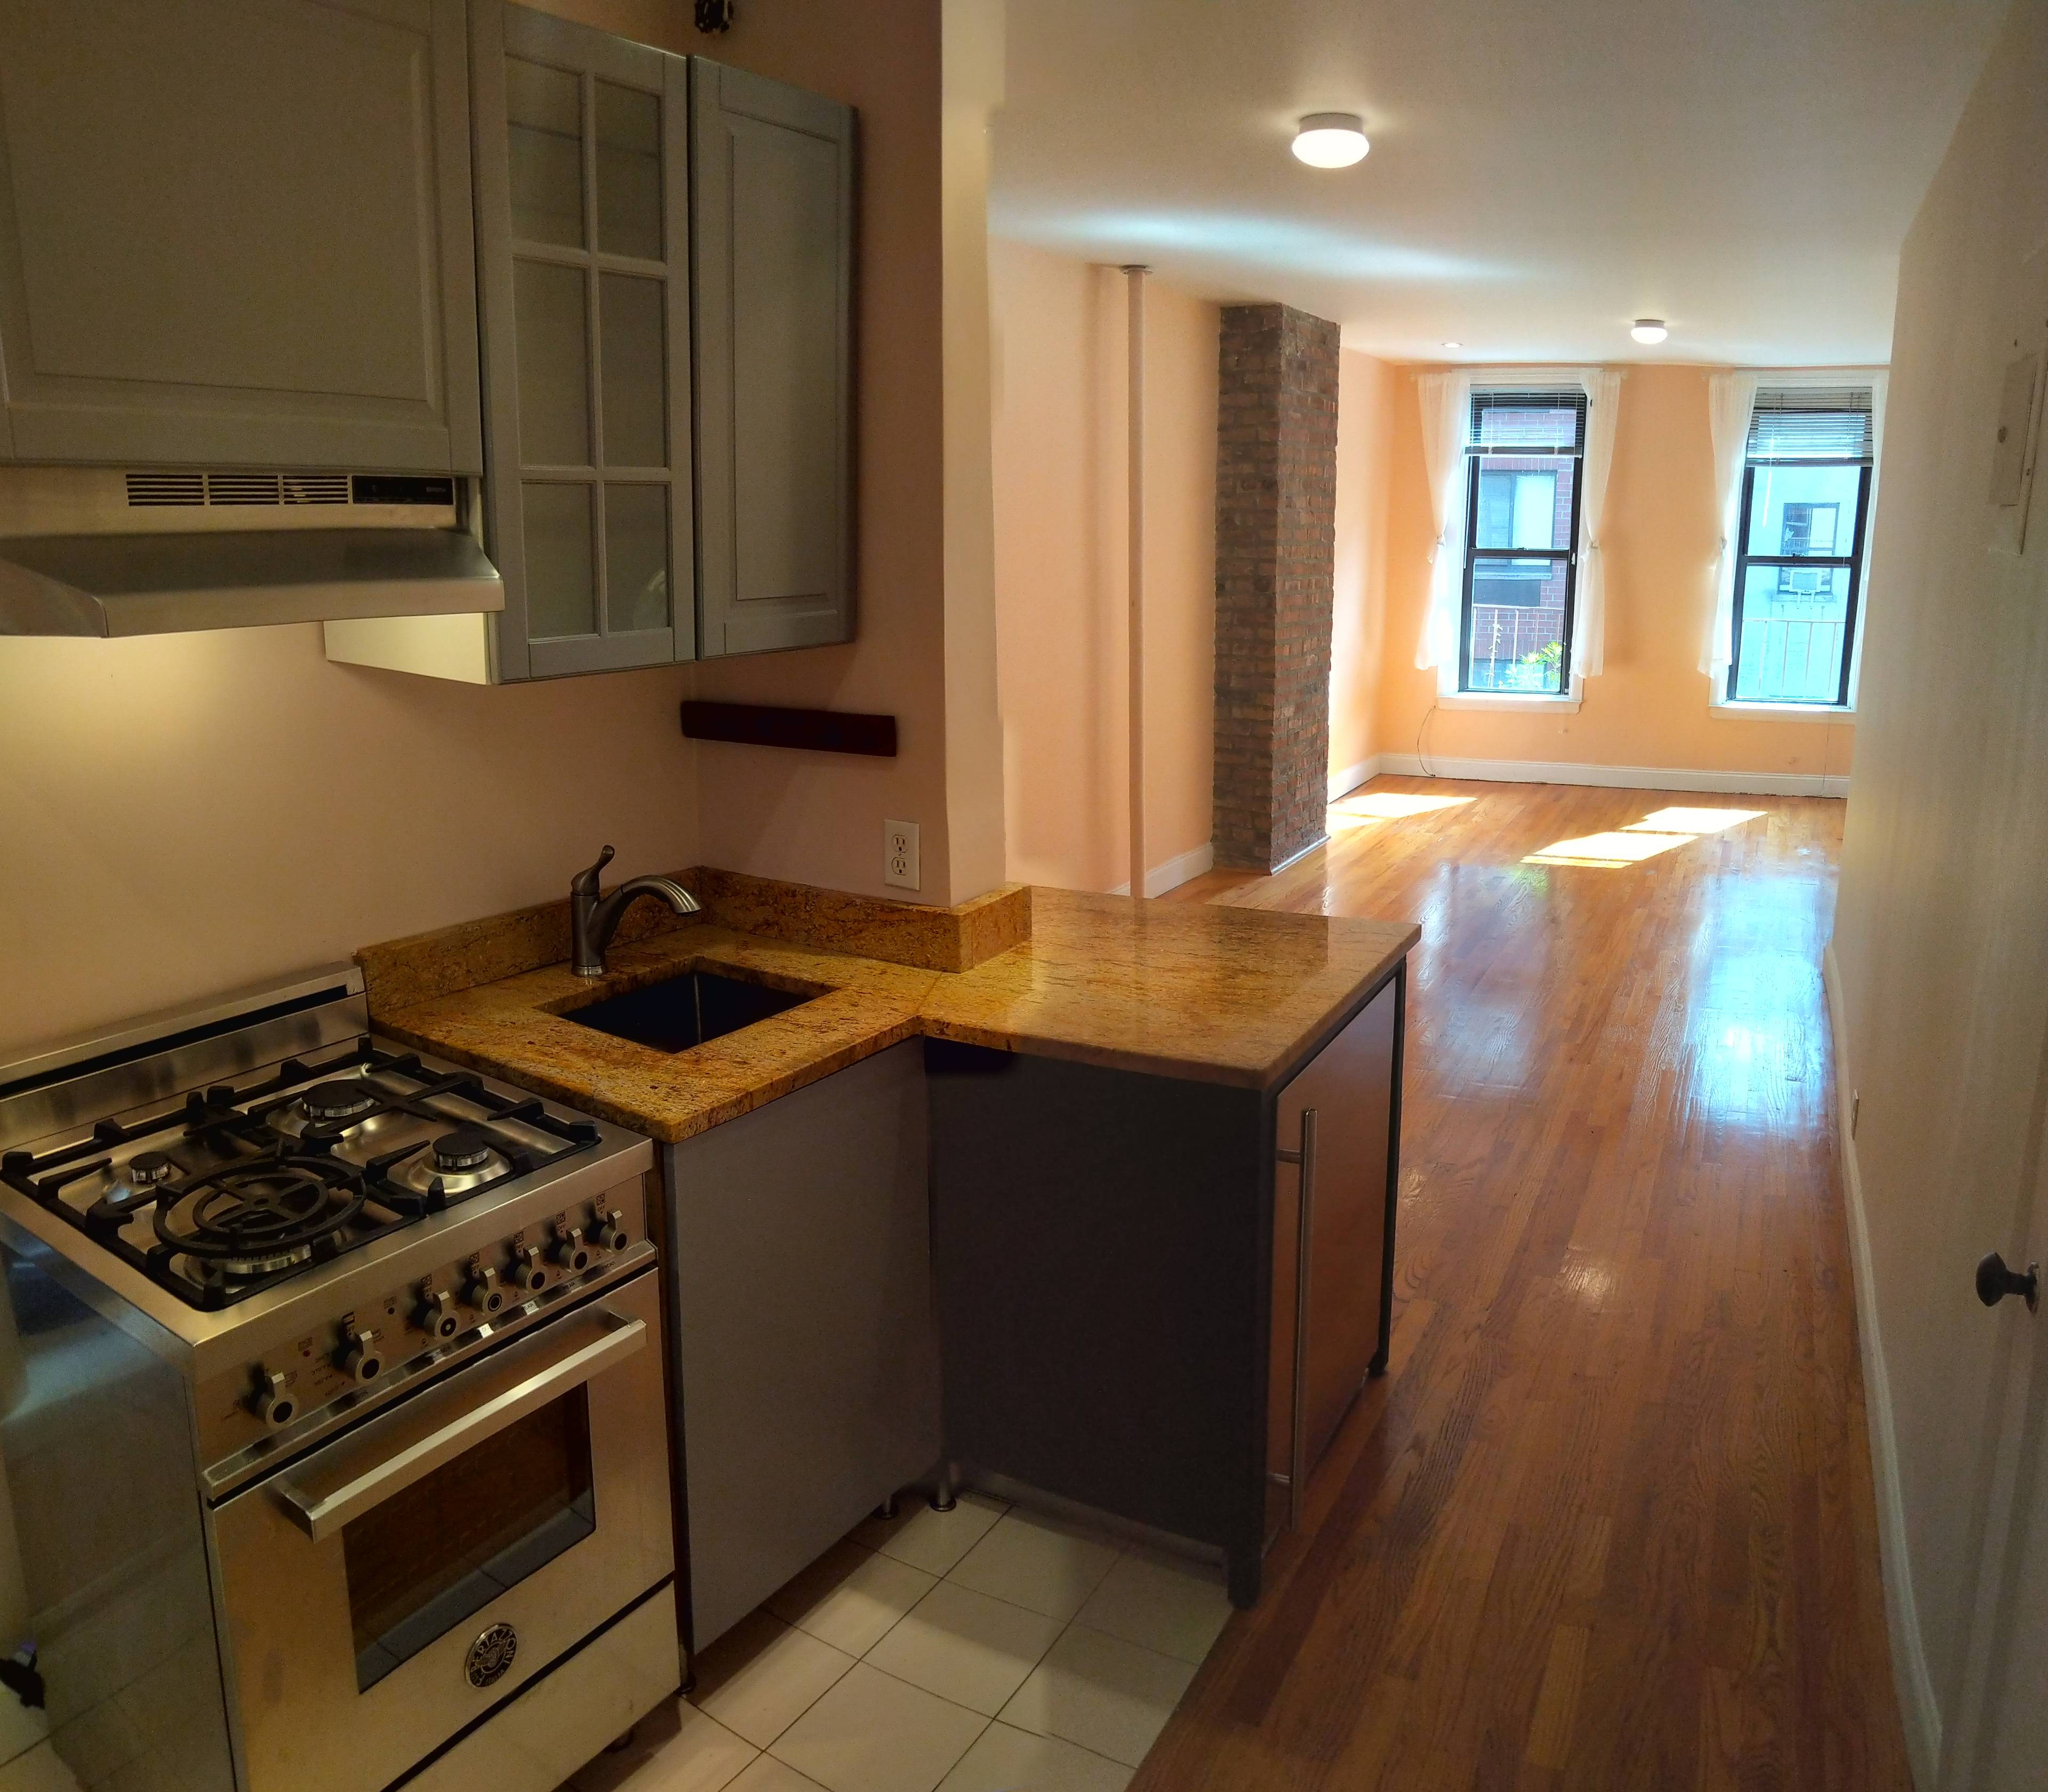 Bright South Facing Studio - updated kitchen - close to Times Square, Theatre District, and Columbus Circle